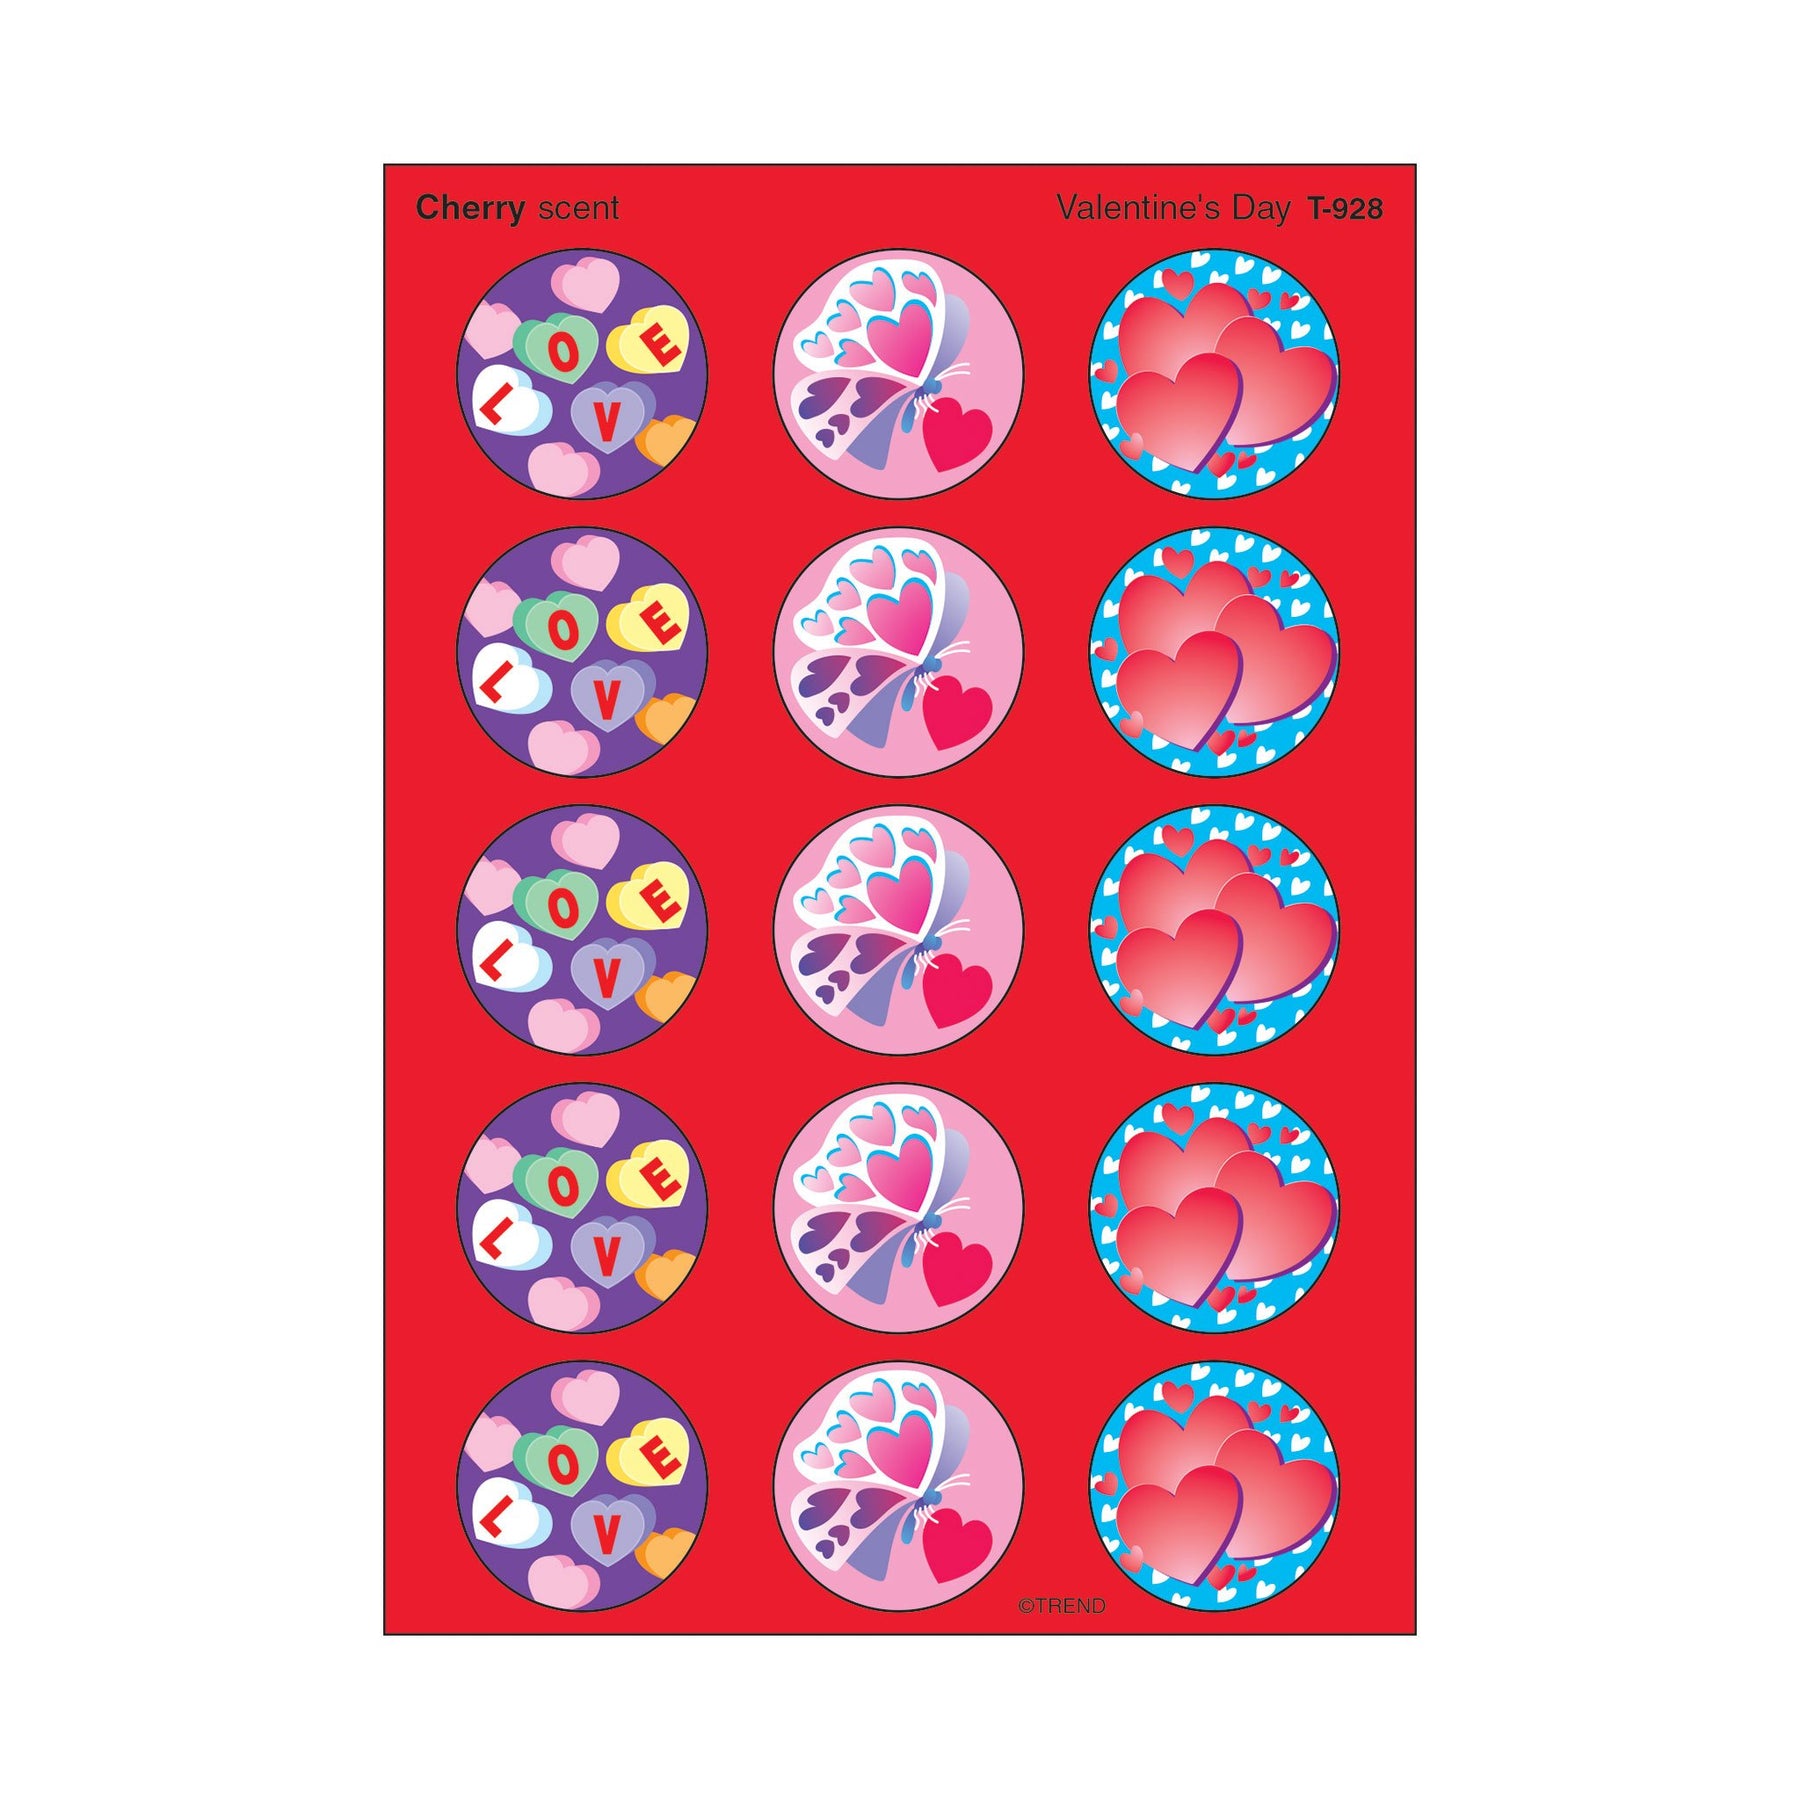 Trend T928 Scratch and Sniff Stickers Valentine's Day (Cherry) - Large Round